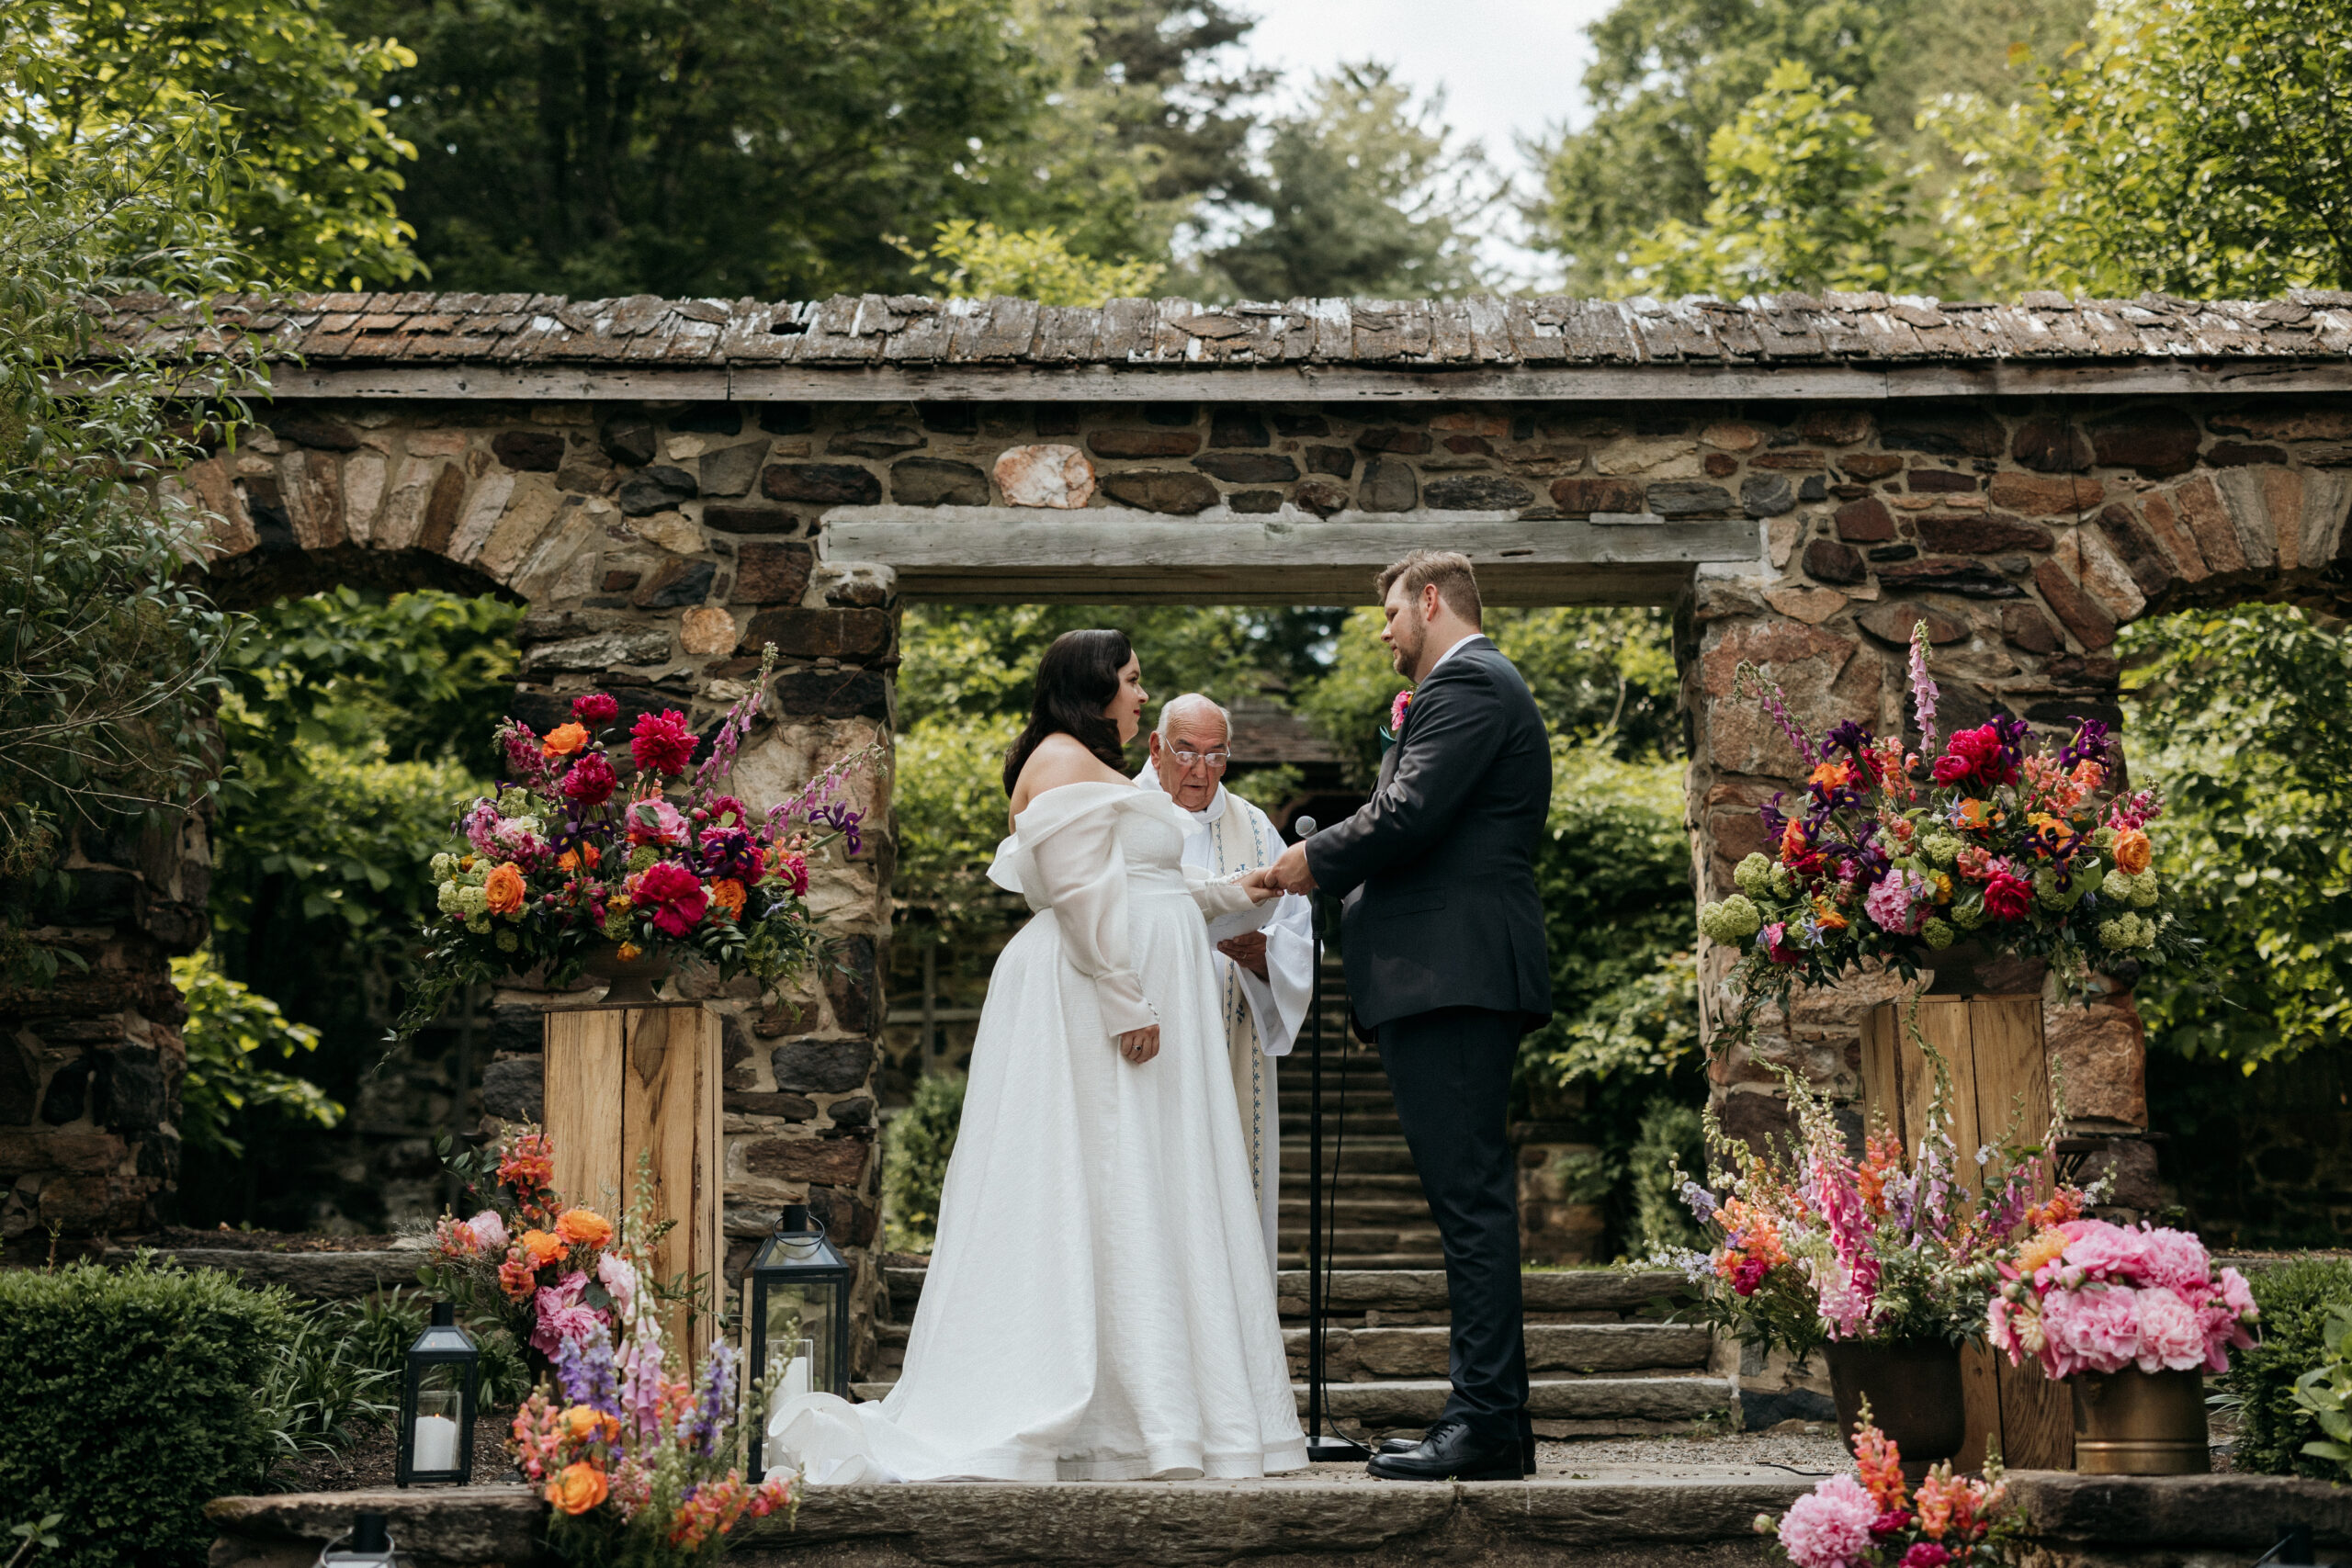 Up on a very beautiful rustic staircase in the middle of a forest, the bride and groom are looking into one another eyes getting married. Two beautoful flower arrangements are on either side on them, the priest in between them up on the stairs.